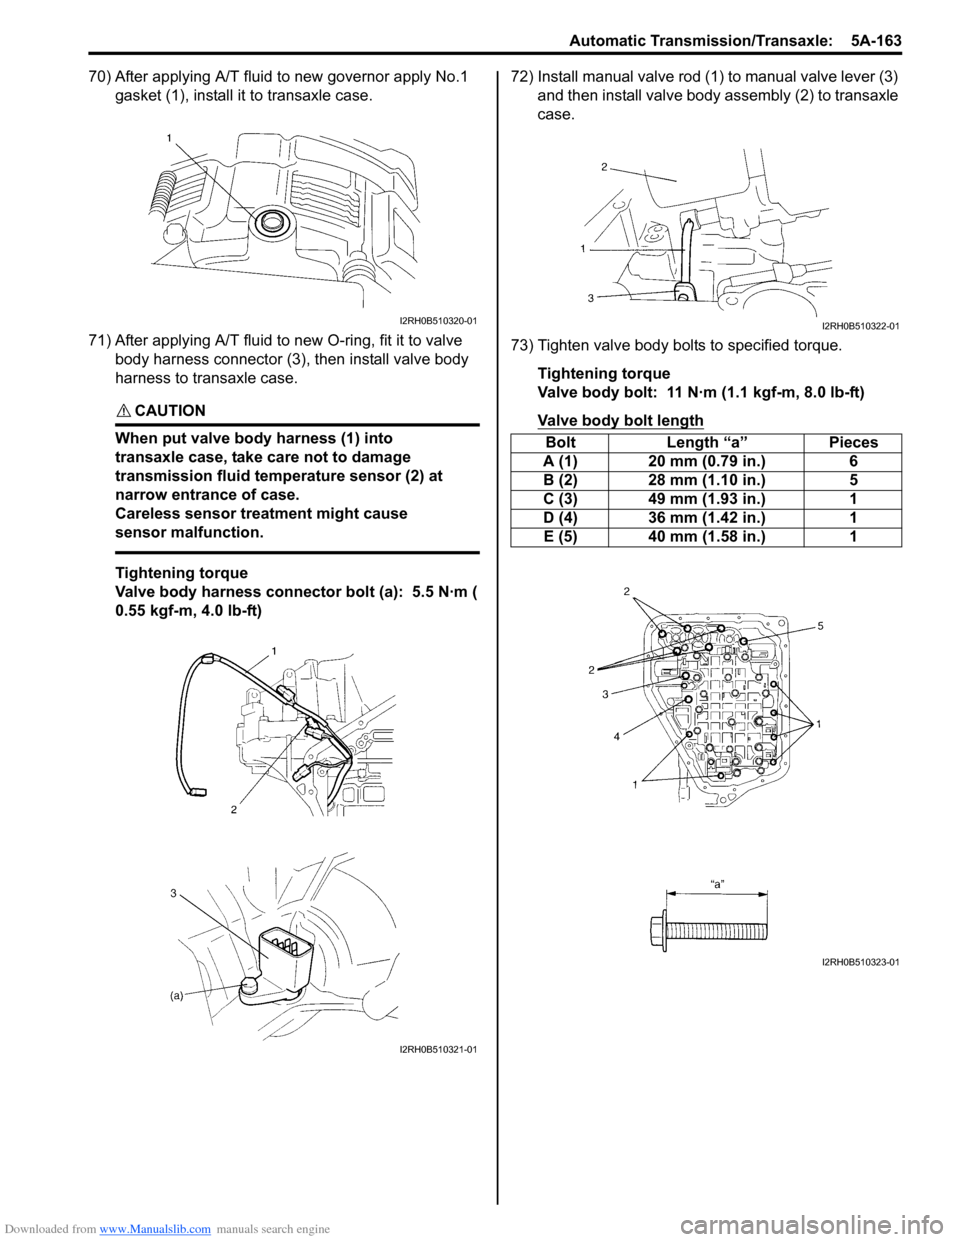 SUZUKI SWIFT 2008 2.G Service Workshop Manual Downloaded from www.Manualslib.com manuals search engine Automatic Transmission/Transaxle:  5A-163
70) After applying A/T fluid to new governor apply No.1 gasket (1), install it  to transaxle case.
71